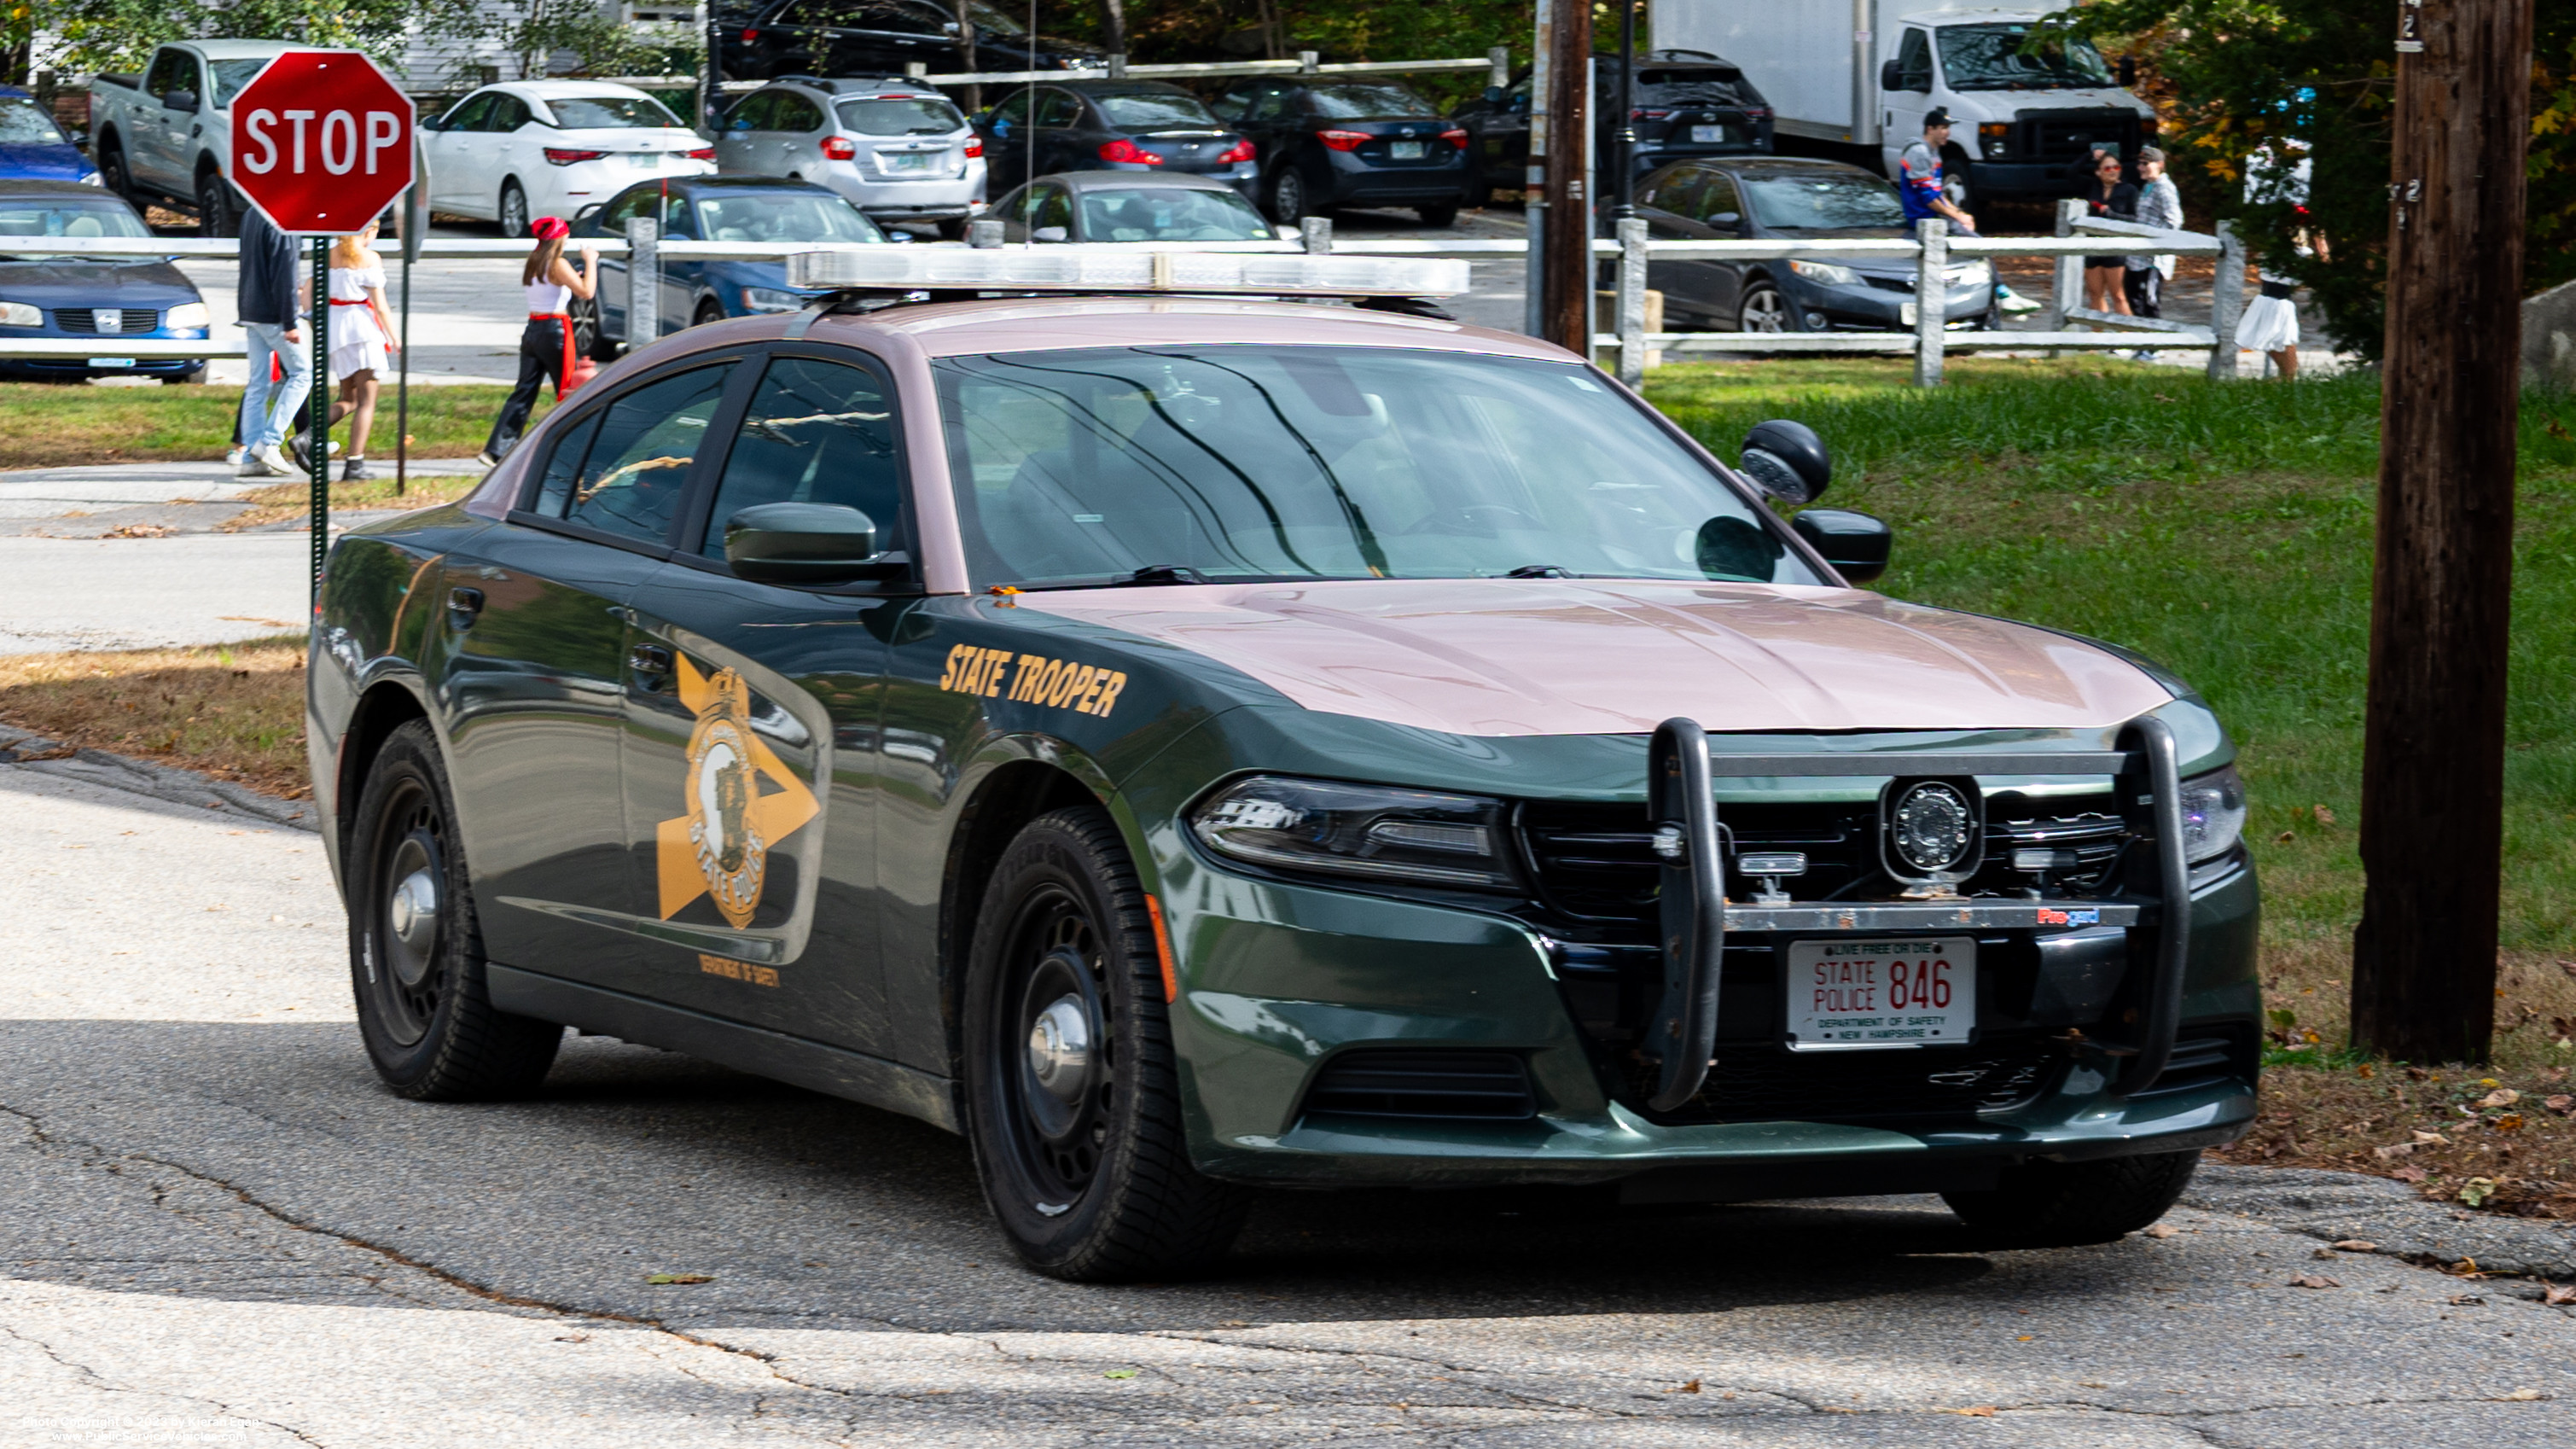 A photo  of New Hampshire State Police
            Cruiser 846, a 2015-2016 Dodge Charger             taken by Kieran Egan